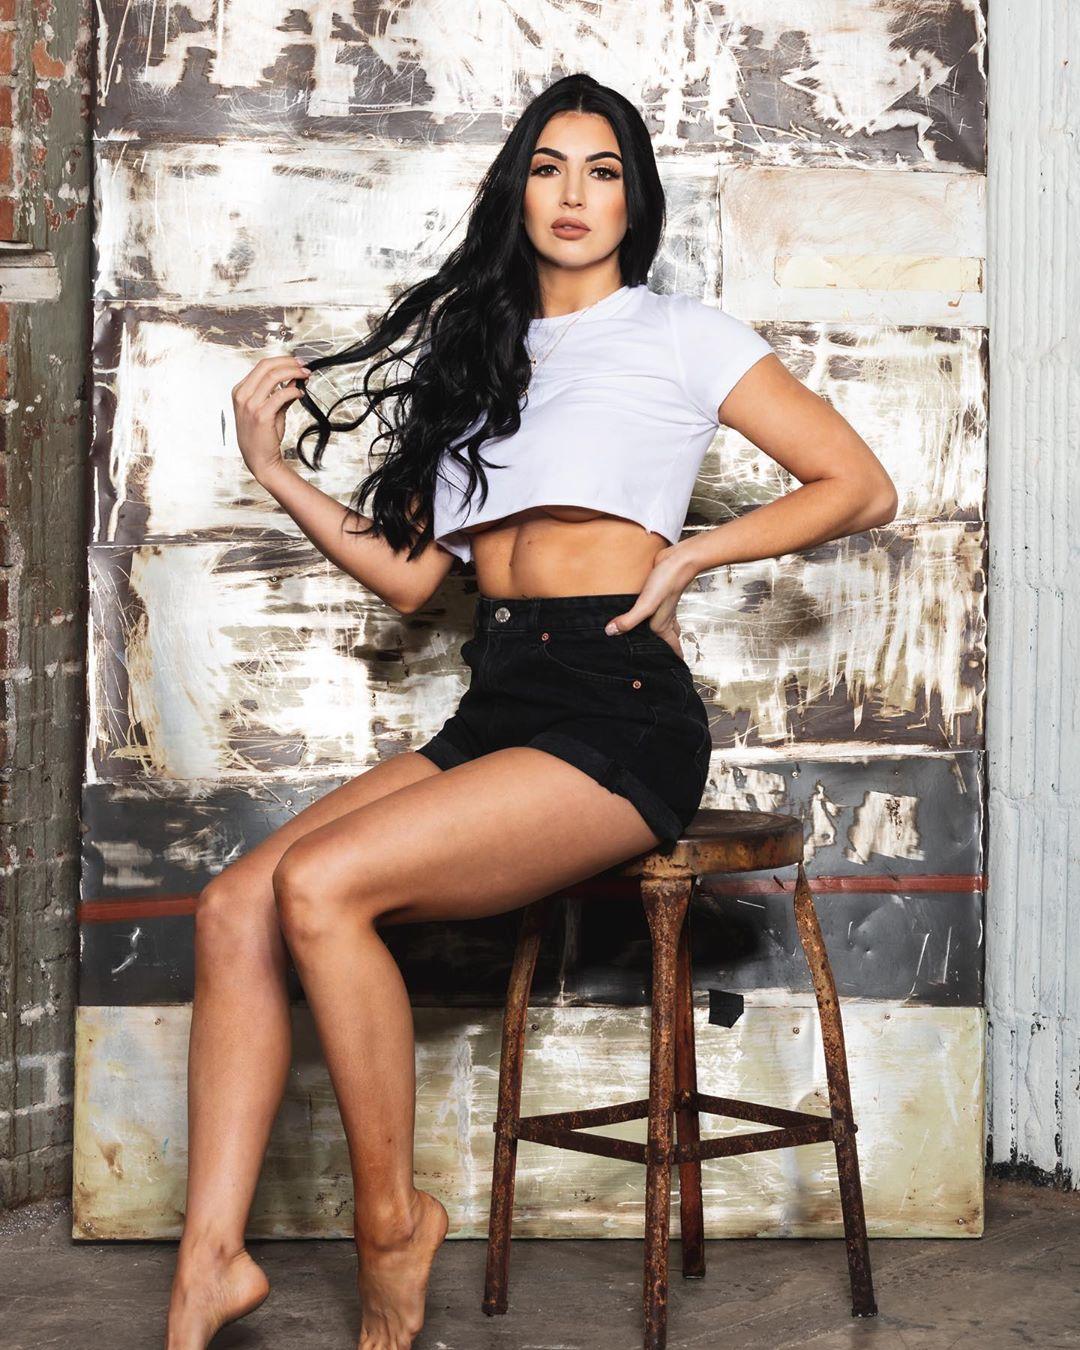 60+ Hot Pictures Of Billie Kay Will Rock The WWE Fan Inside You 392